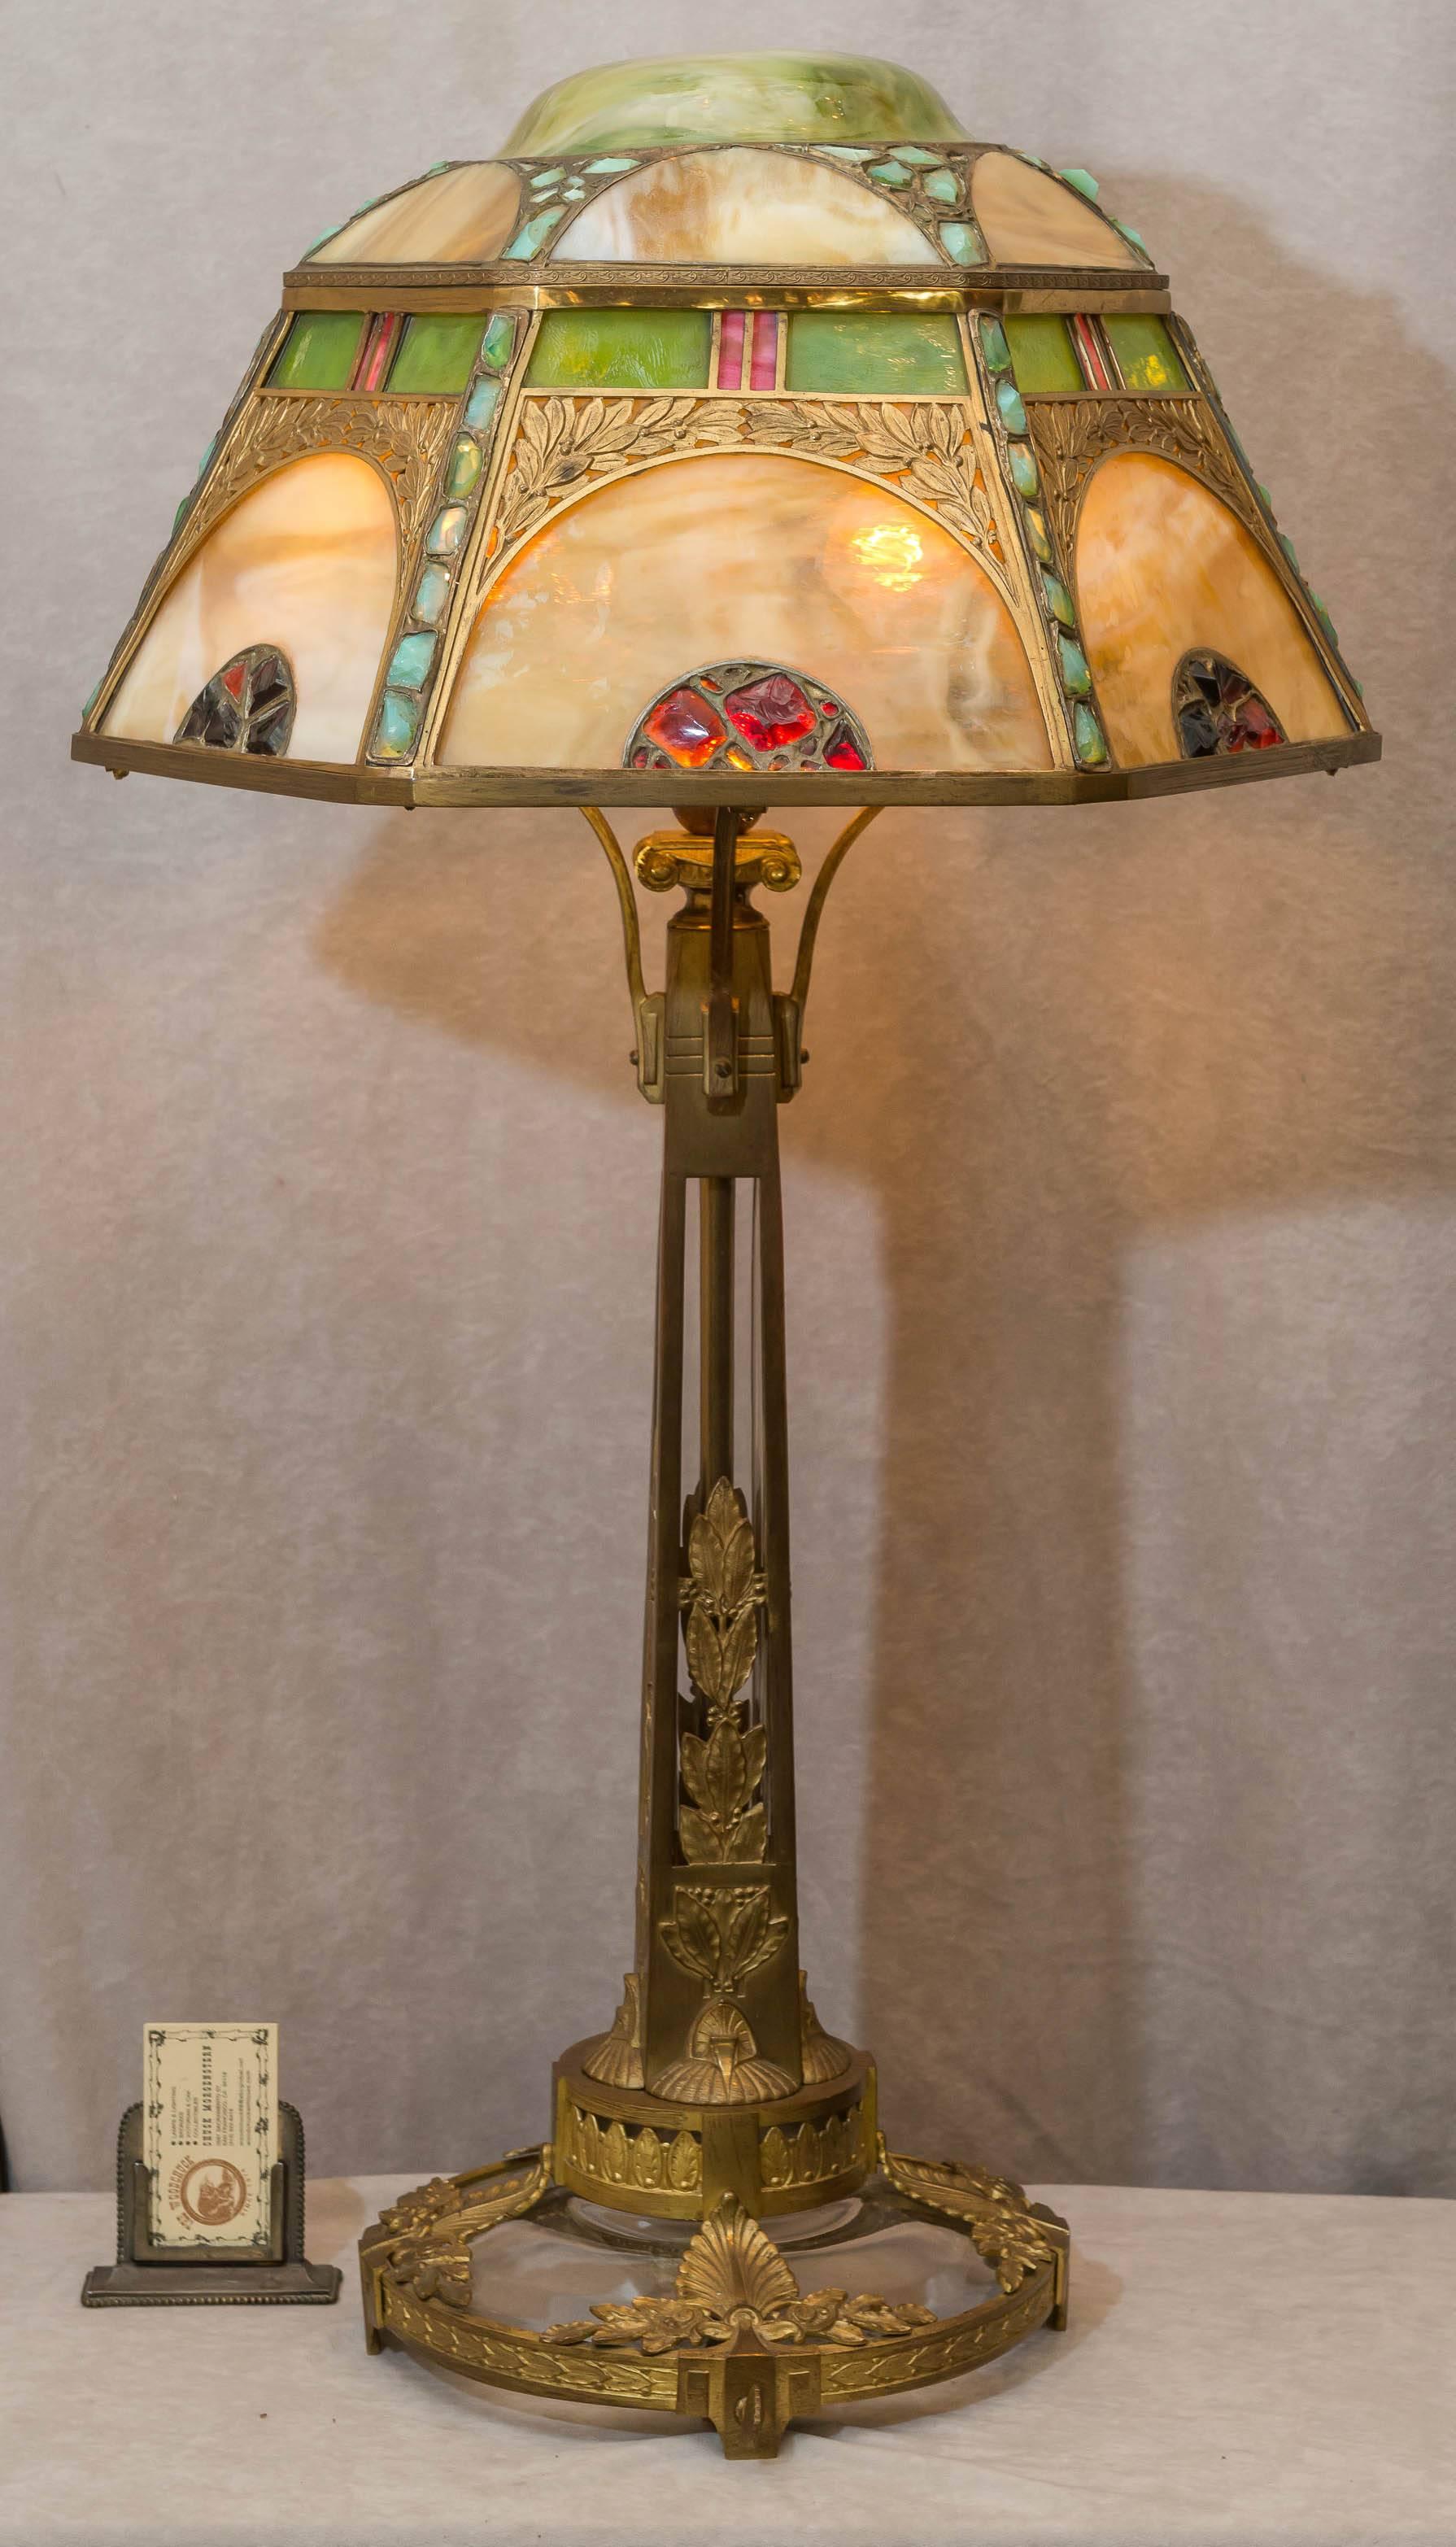 We have been buying Austrian lighting for decades. We have never seen anything quite like this impressive and exotic table lamp. Rich original gilt finish, colorful jewels and slag glass are just some of the characteristics of this table lamp. While